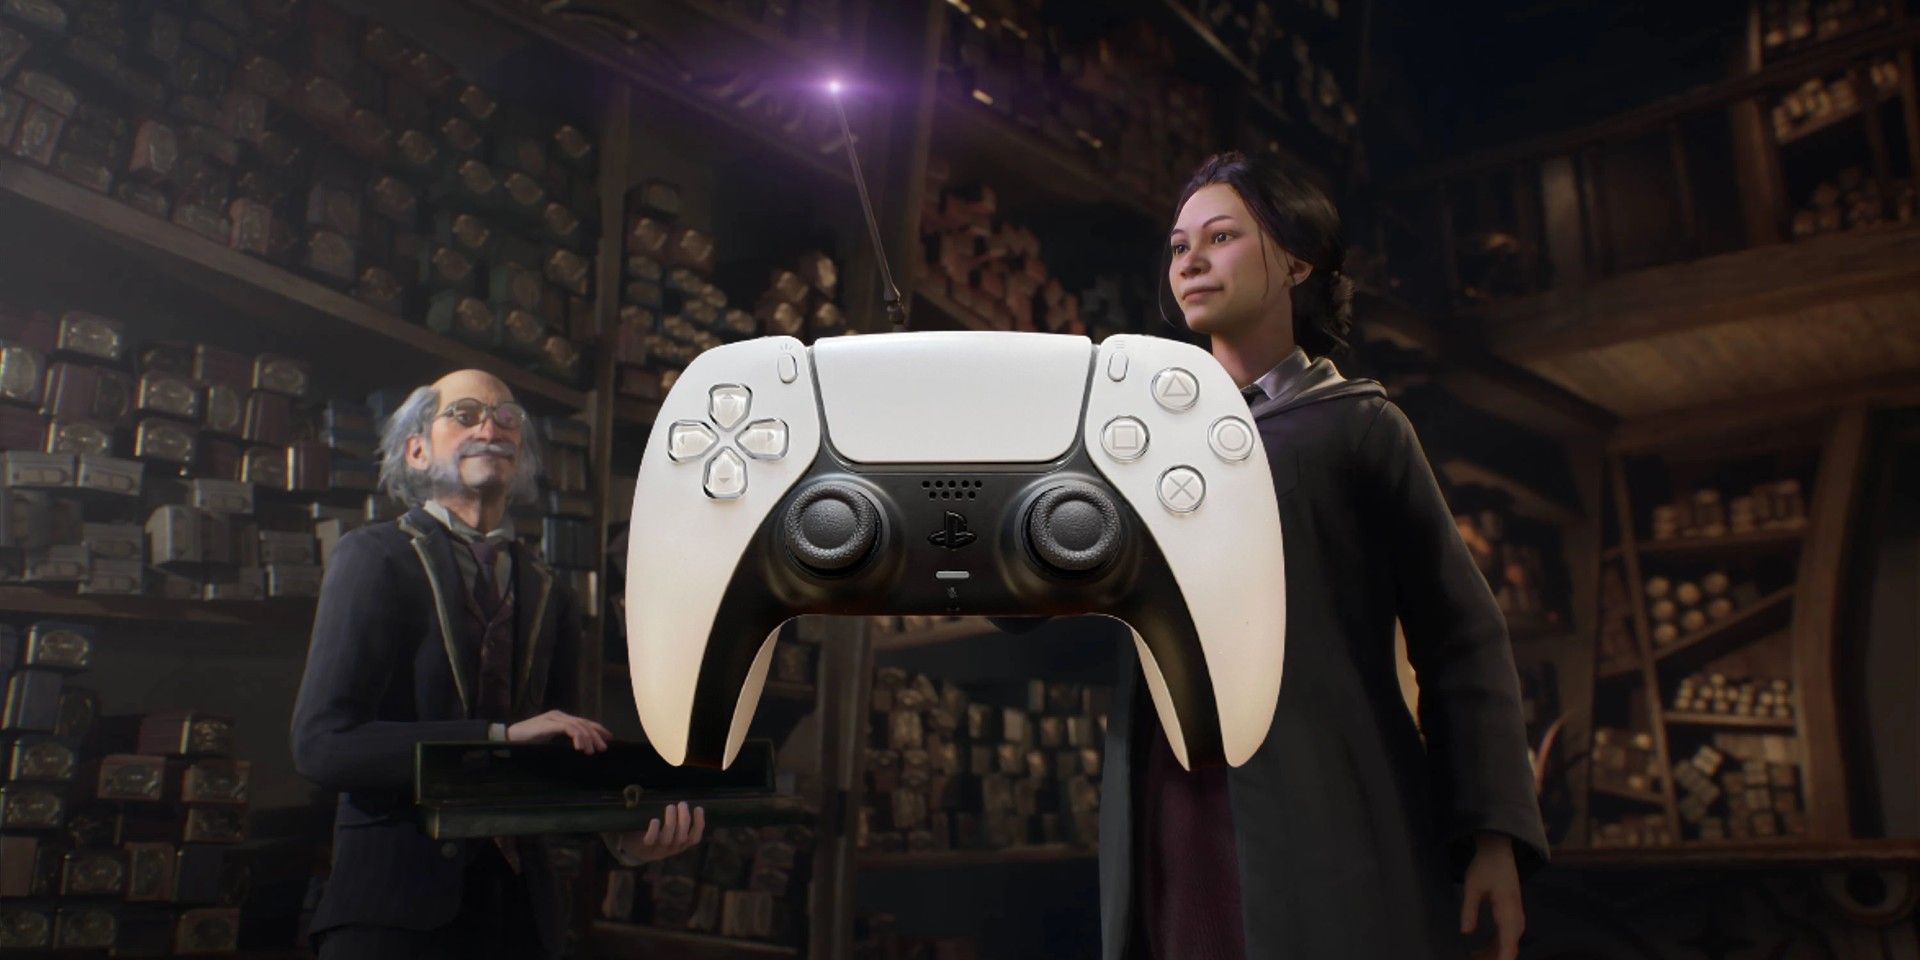 Hogwarts Legacy PS5 controller release time confirmed - Silent PC Review